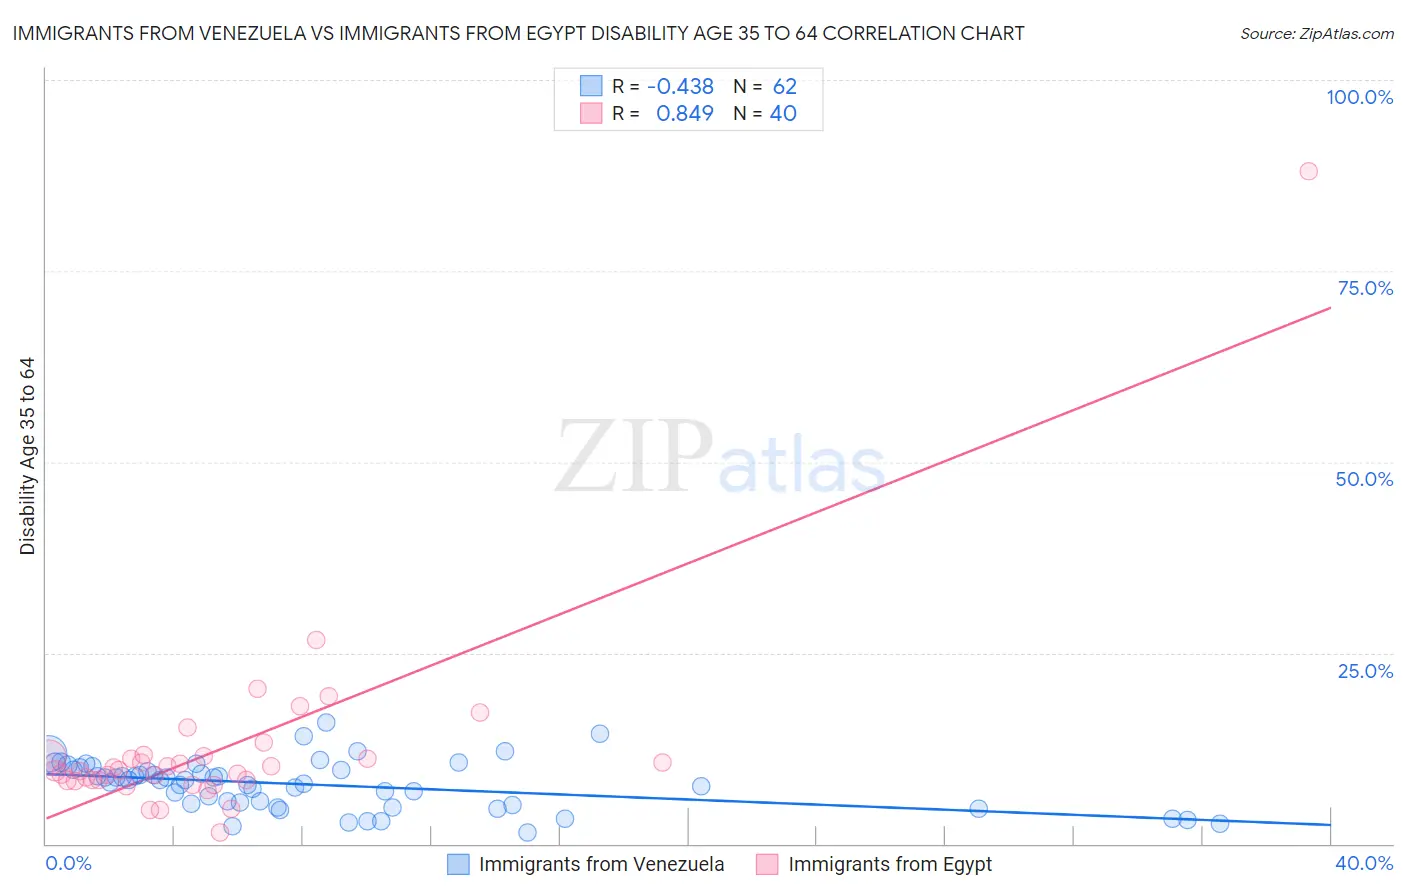 Immigrants from Venezuela vs Immigrants from Egypt Disability Age 35 to 64